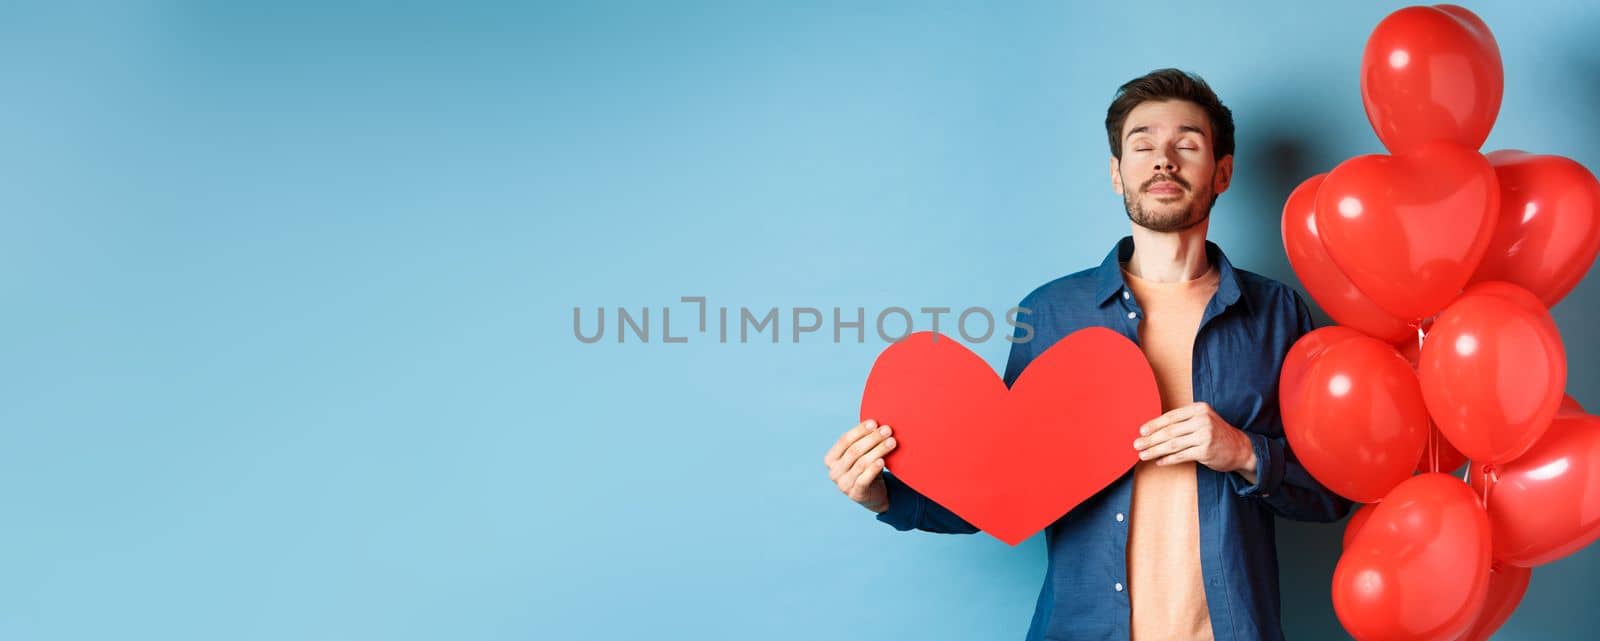 Valentines day concept. Man dreaming of true love, holding red heart cutout and standing near romantic balloons, blue background.